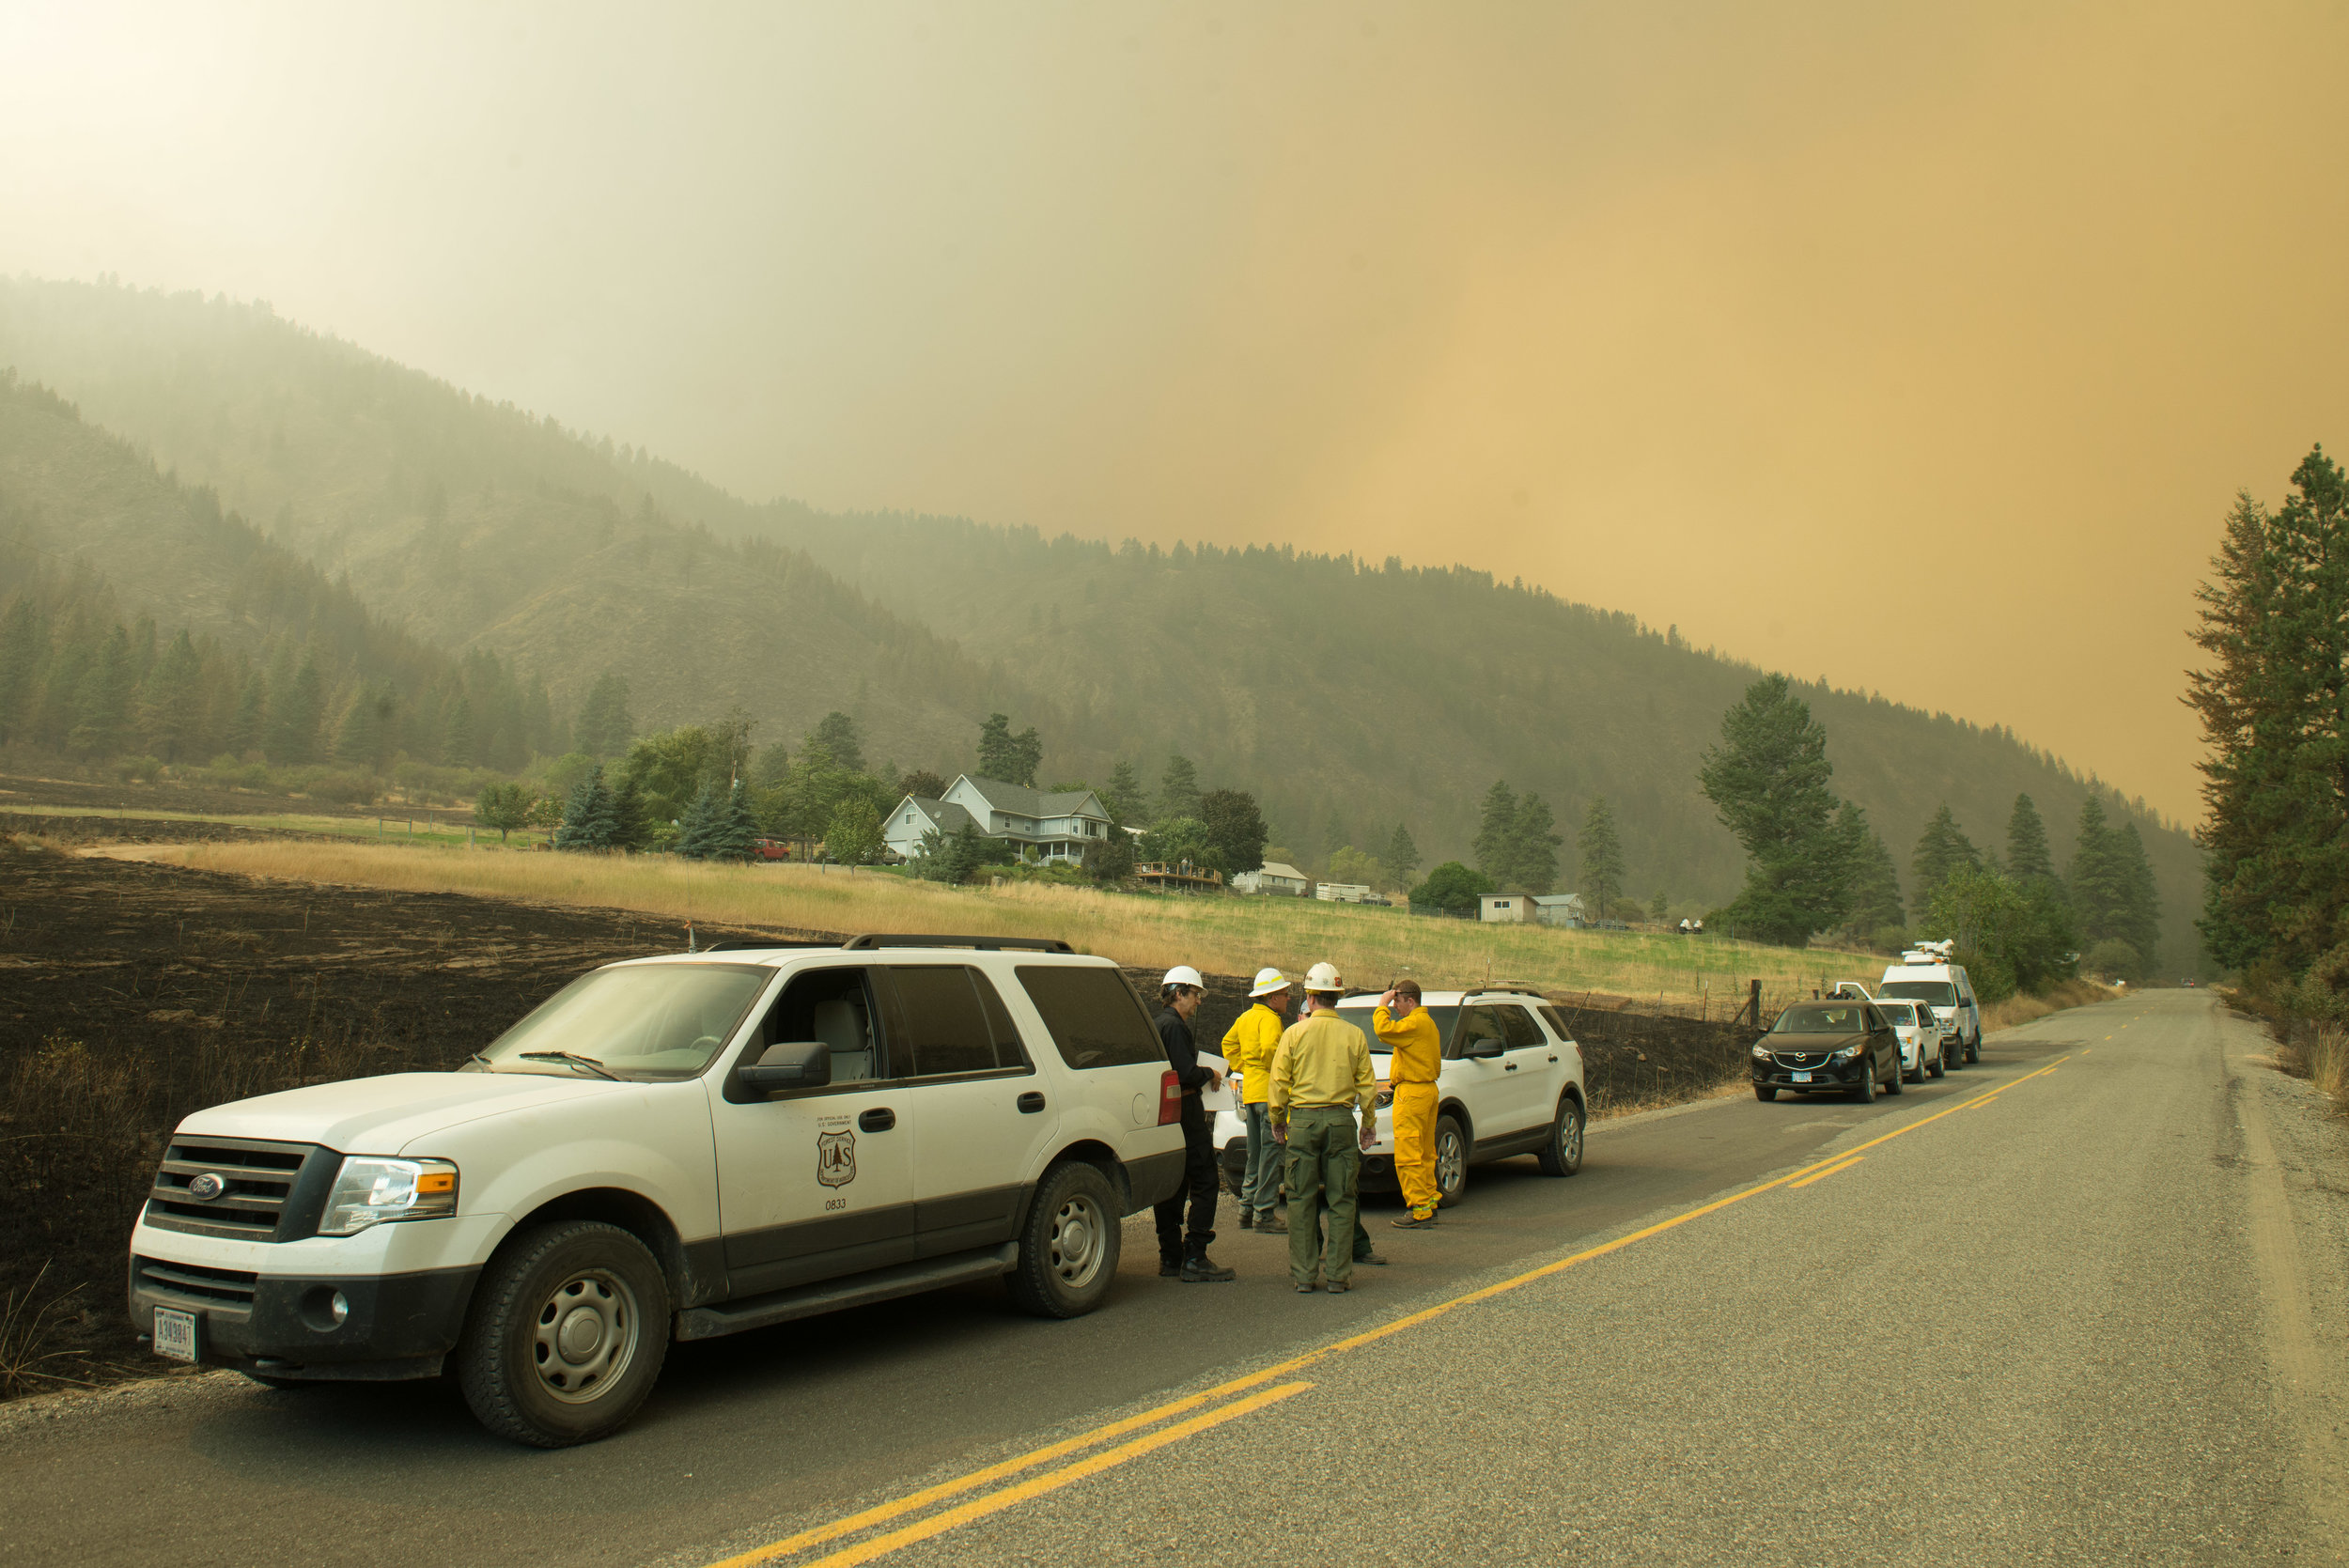  Journalists and Firefighters observe smoke plumes rising from the Okanogan Complex Fire on Salmon Creek Road, South Central Okanogan County, Sunday August 23, 2015. Salmon Creek road contains a number of residential structures that fire crews sought